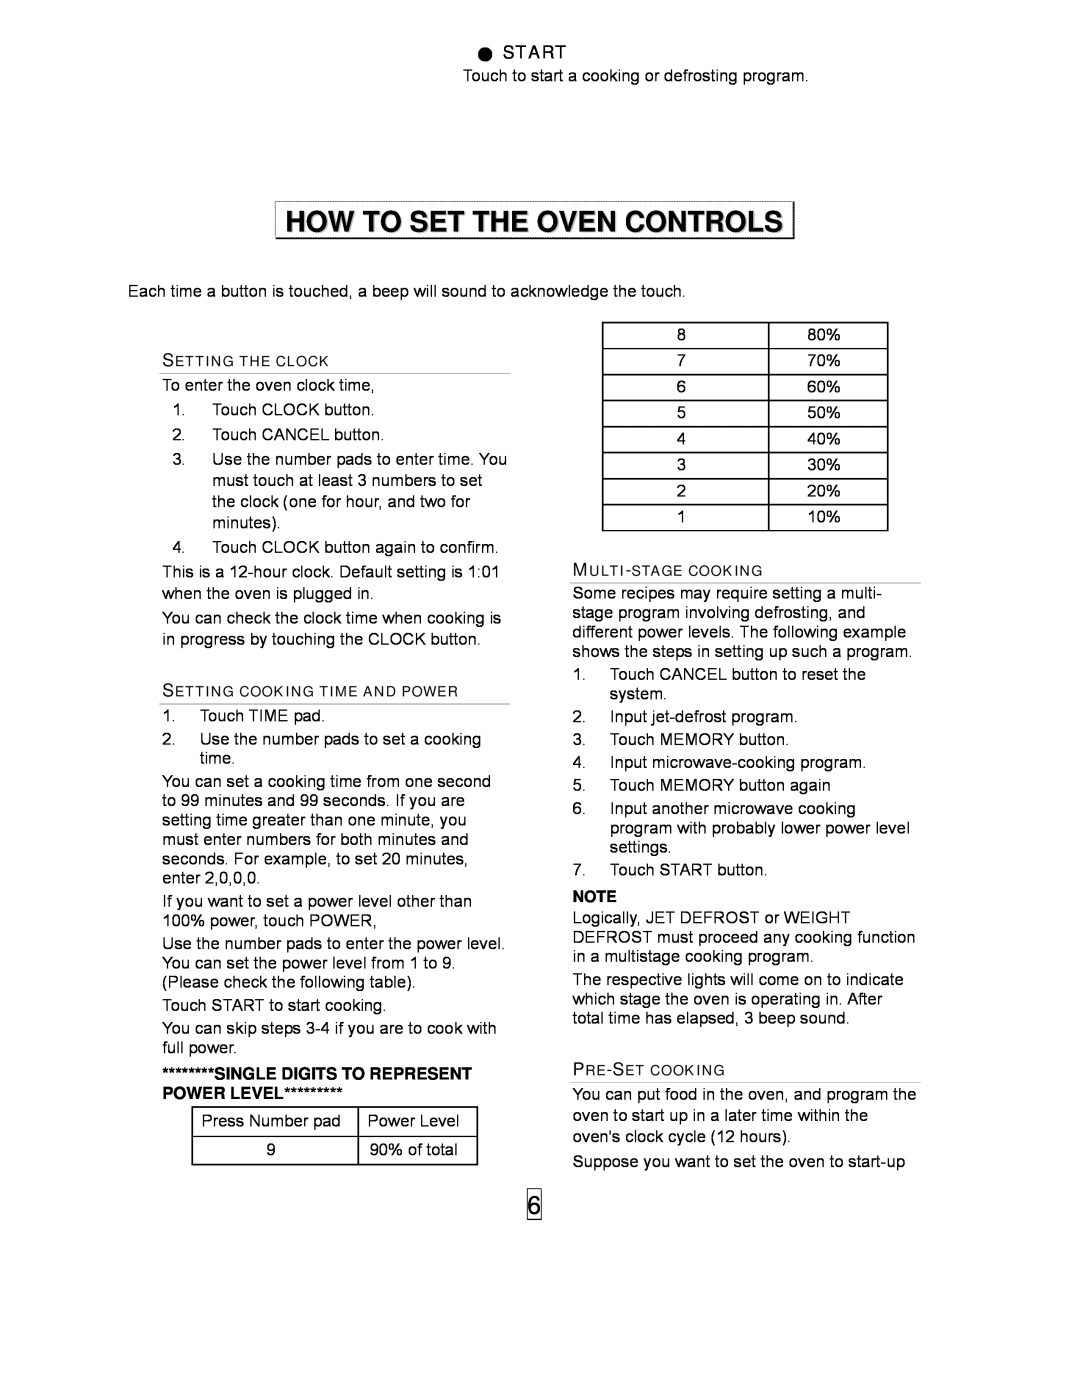 Sanyo EM-S5597B instruction manual How To Set The Oven Controls, Start, Single Digits To Represent Power Level 